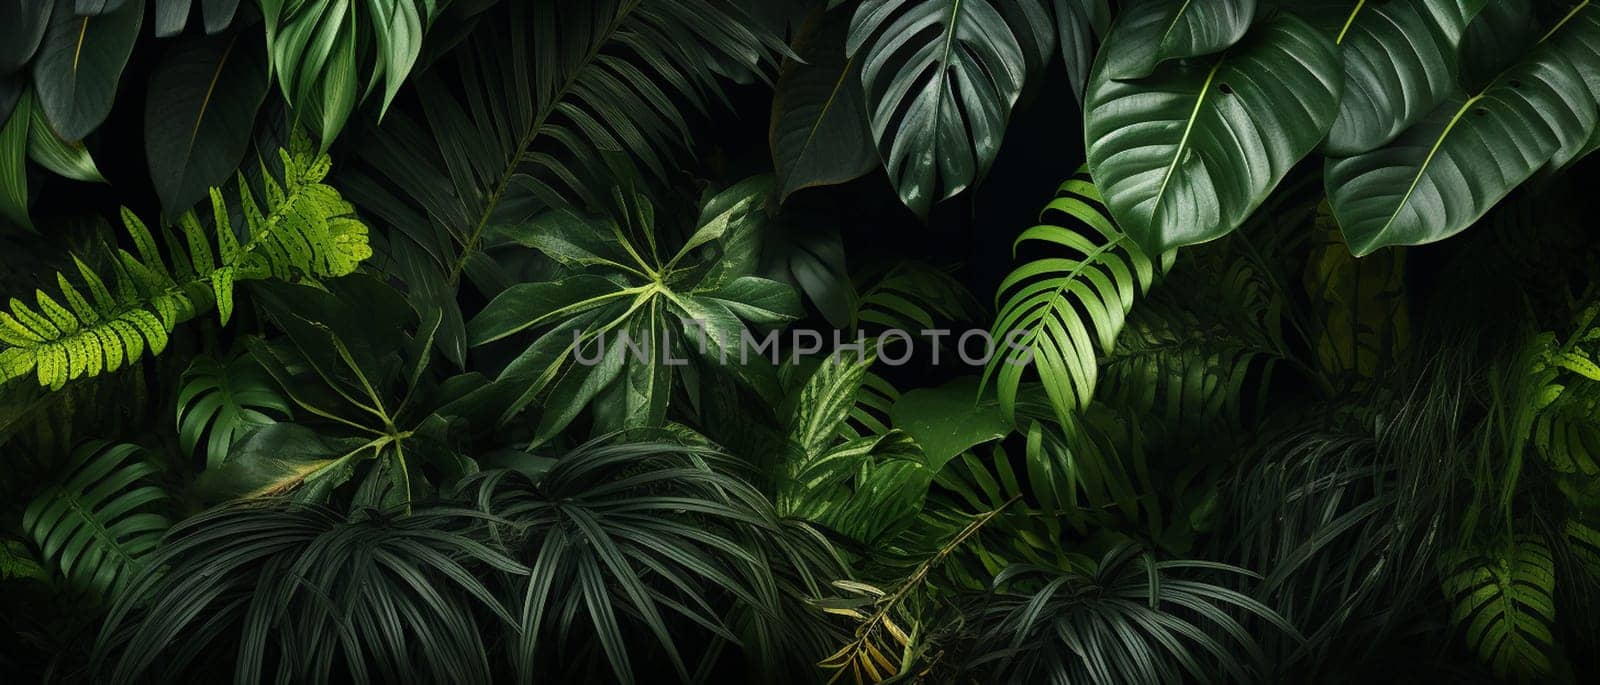 Tropical palm leaves, floral pattern background, real photo by Andelov13